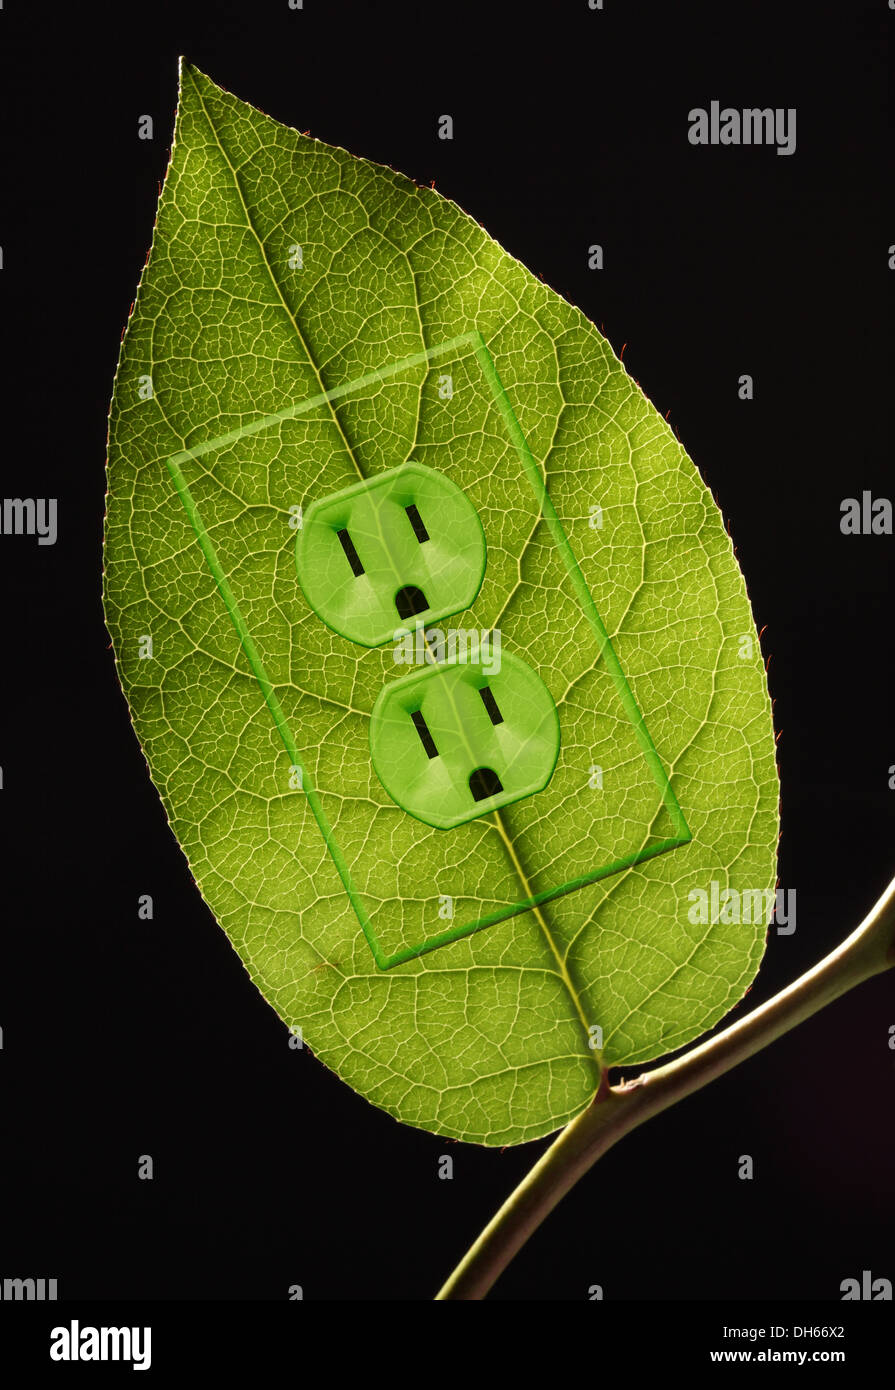 A green plant leaf on a branch with green colored electrical outlets added. Black background Stock Photo